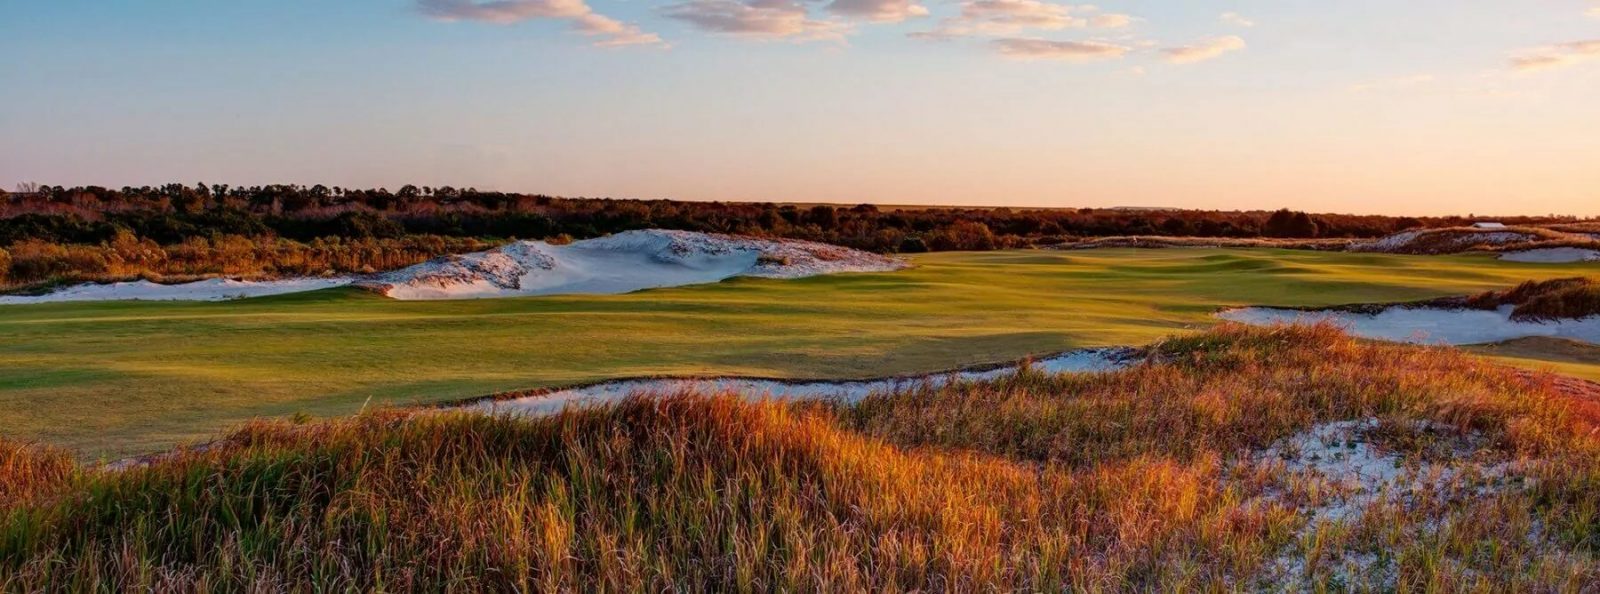 nearest, closest airport to streamsong